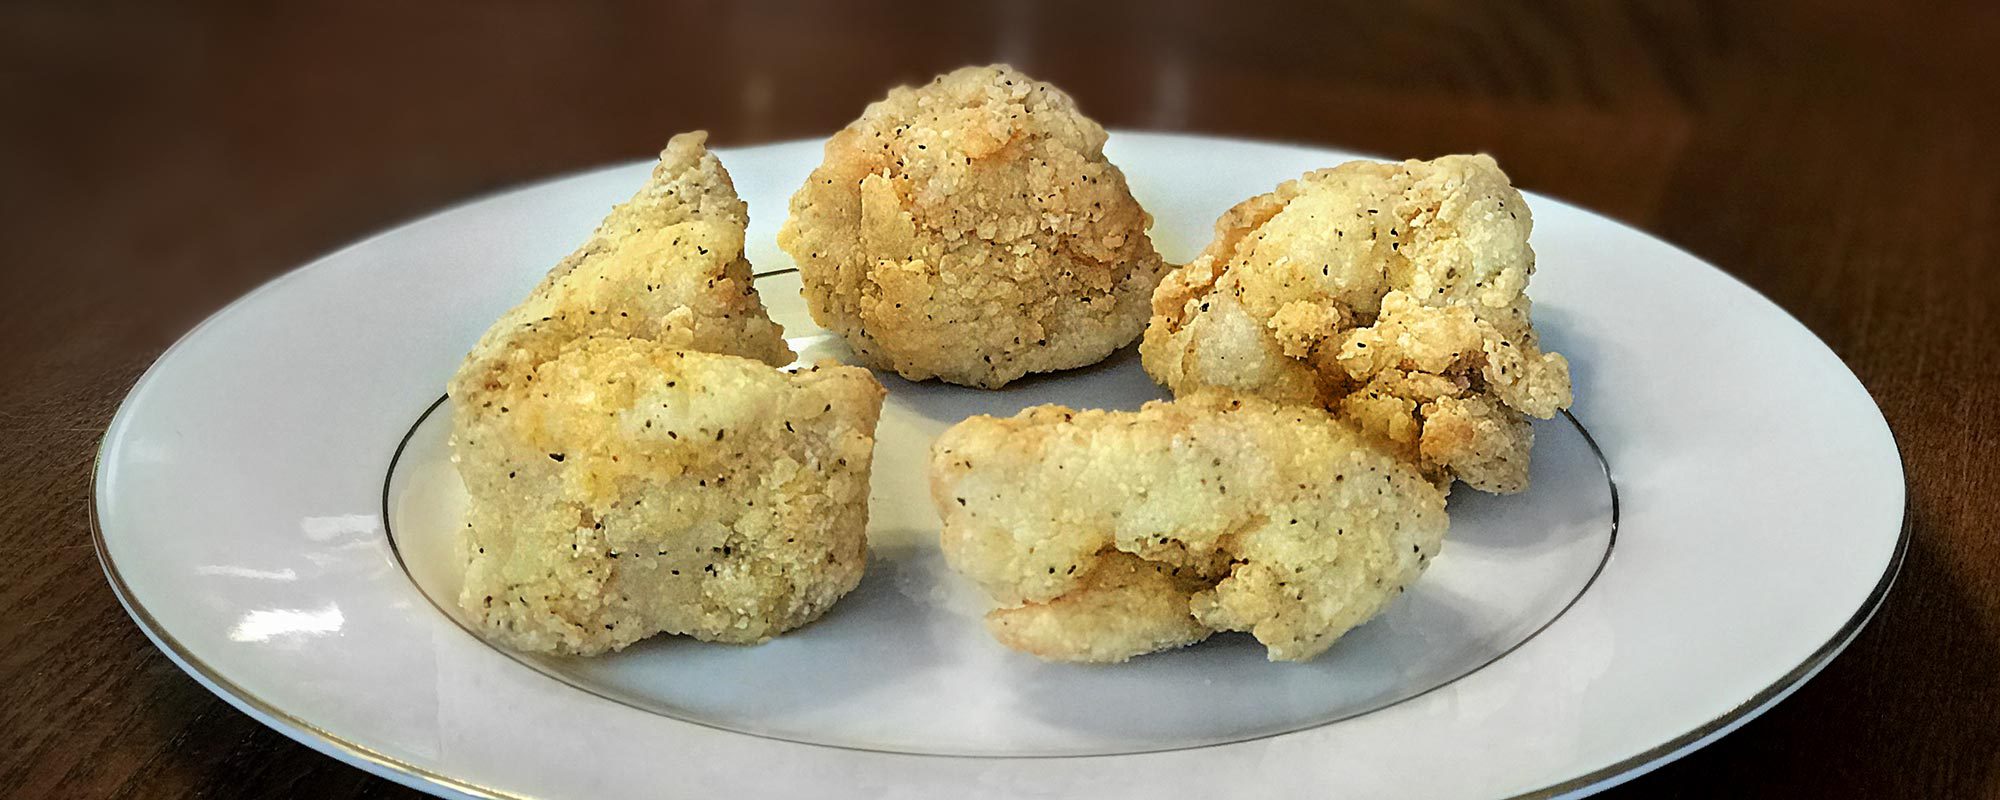 Home-made chicken nuggets